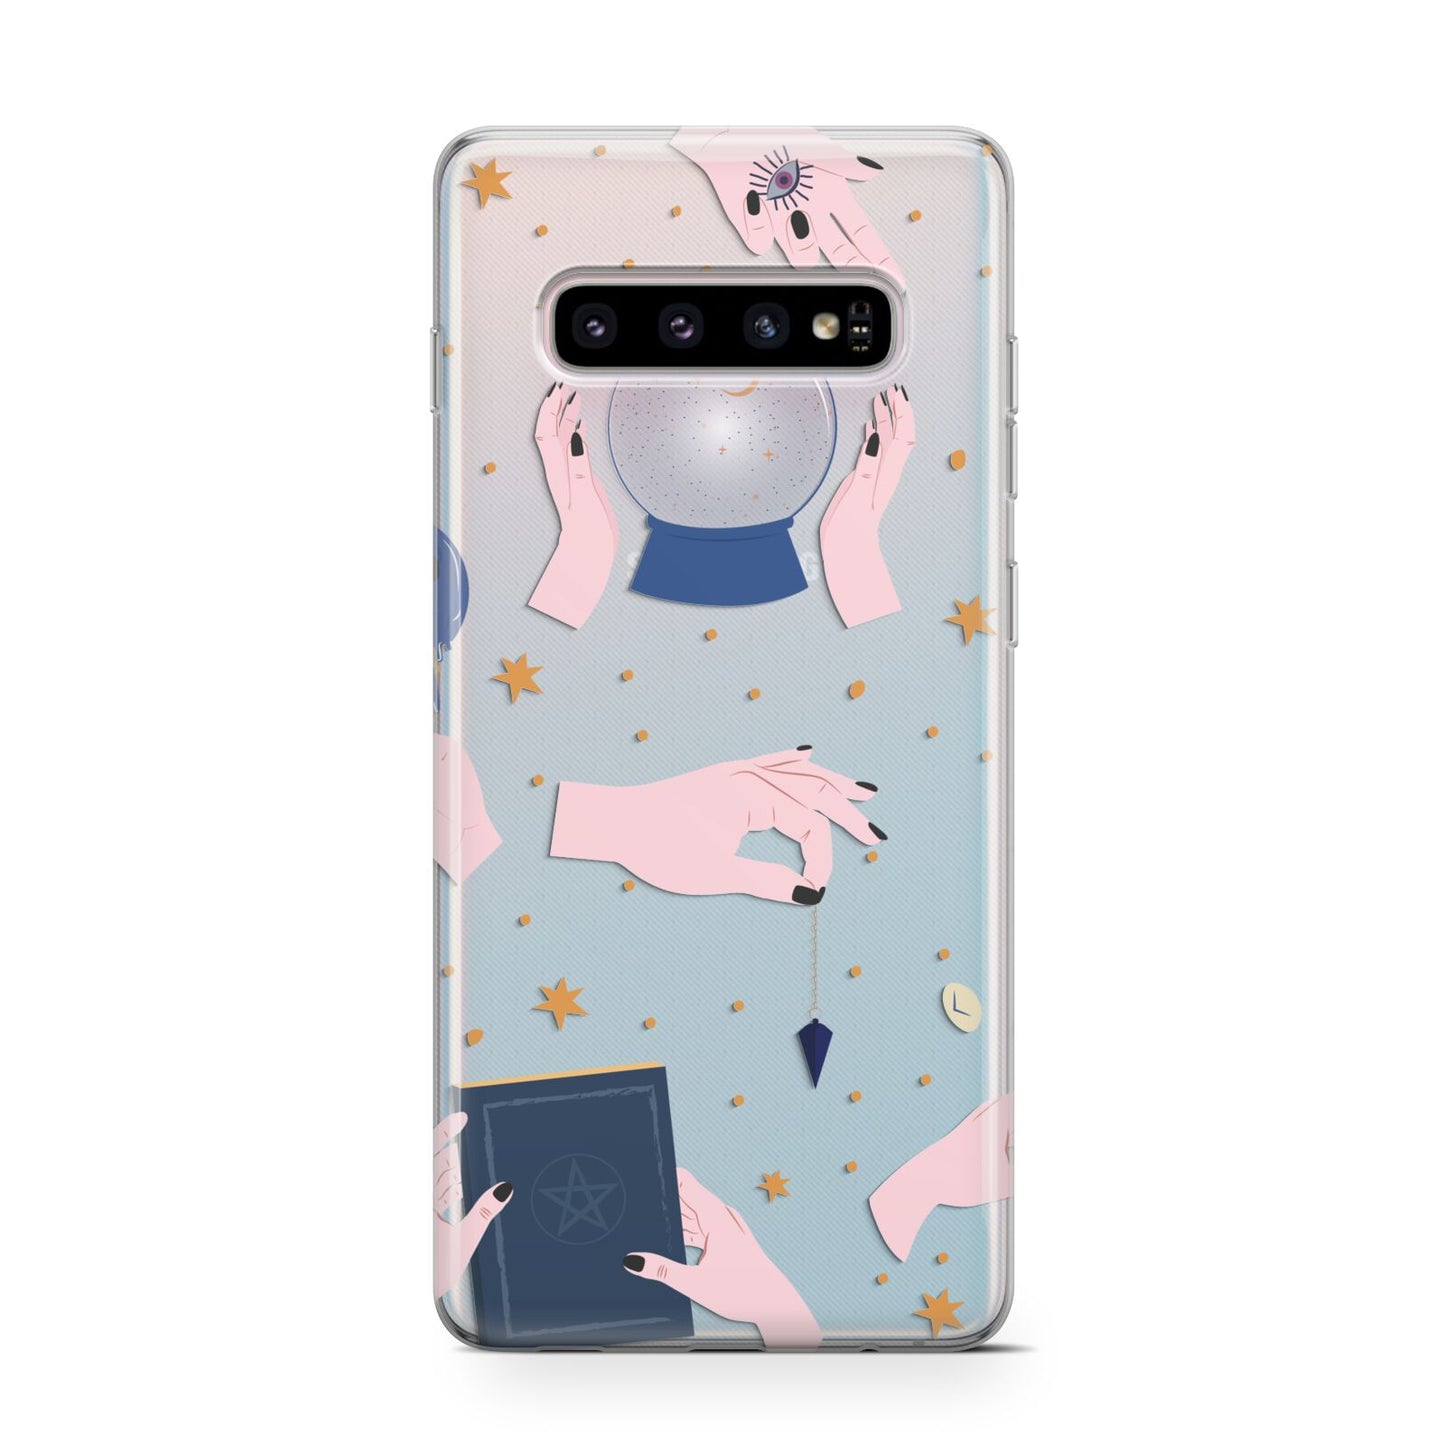 Clairvoyant Witches Hands Samsung Galaxy S10 Case